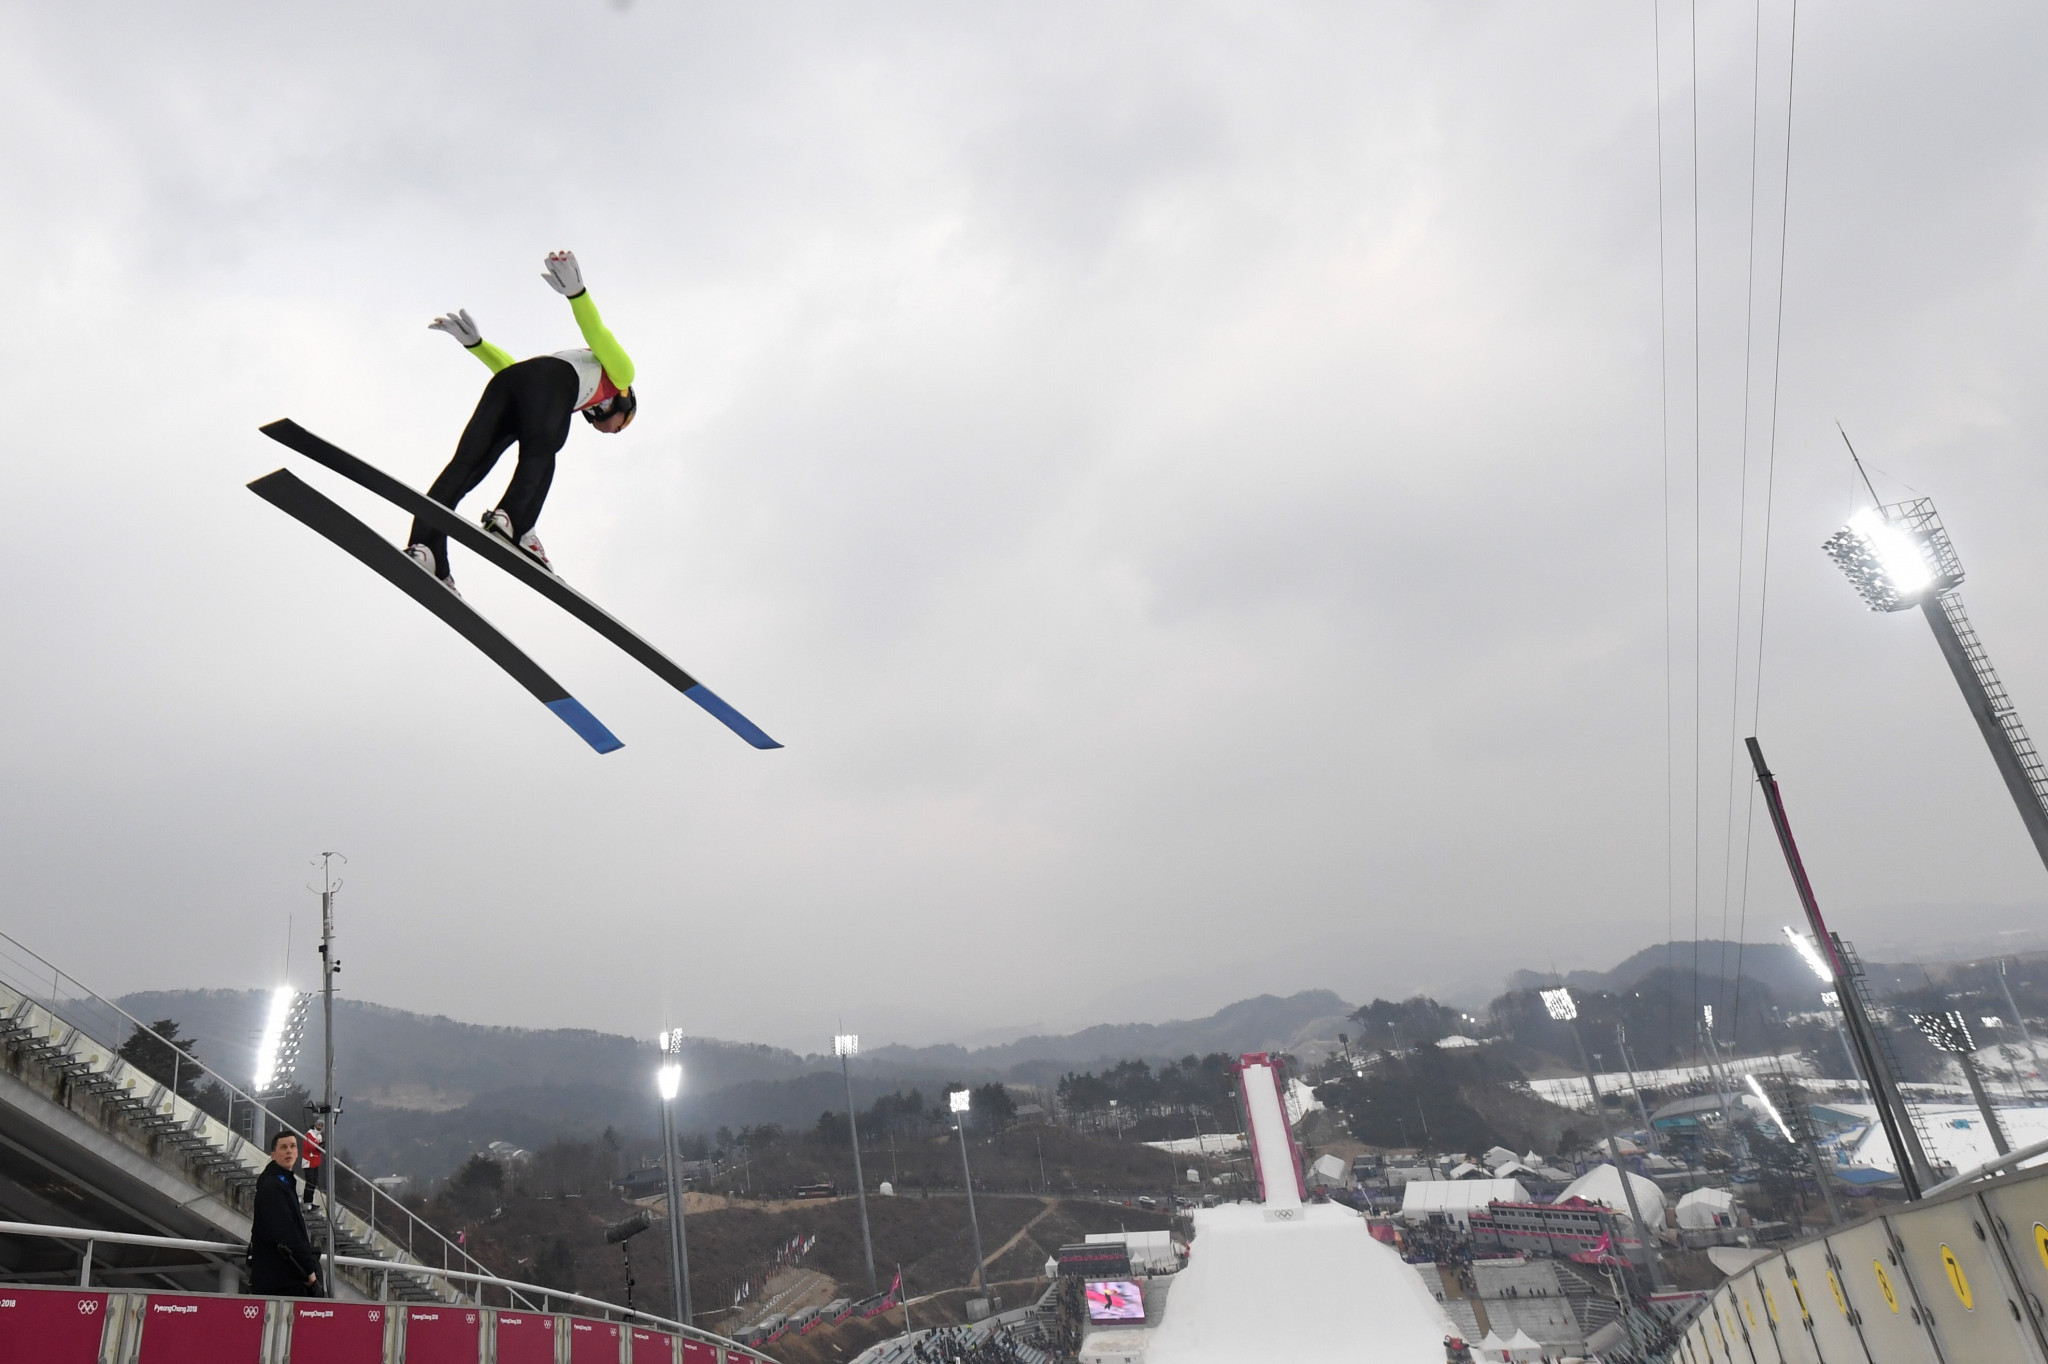 Austria's Franz-Josef Rehrl topped the ski jumping standings, but ended in 13th position overall ©Getty Images